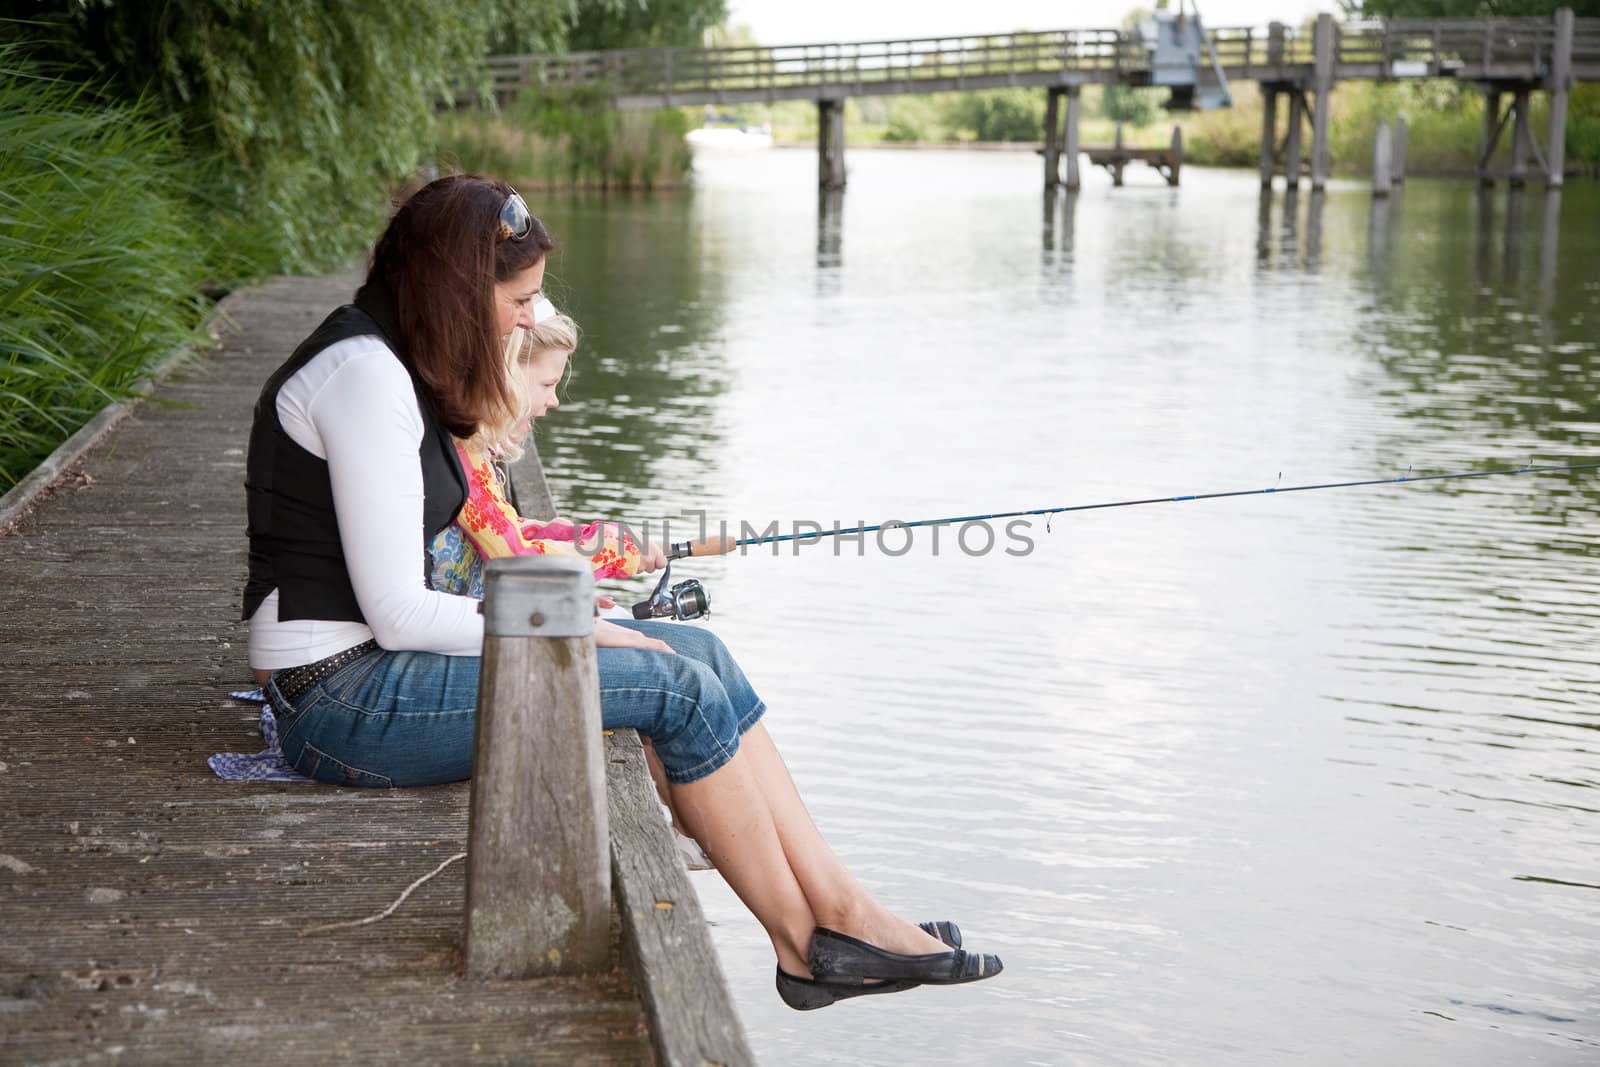 Mom and daughter together by the waterside fishing